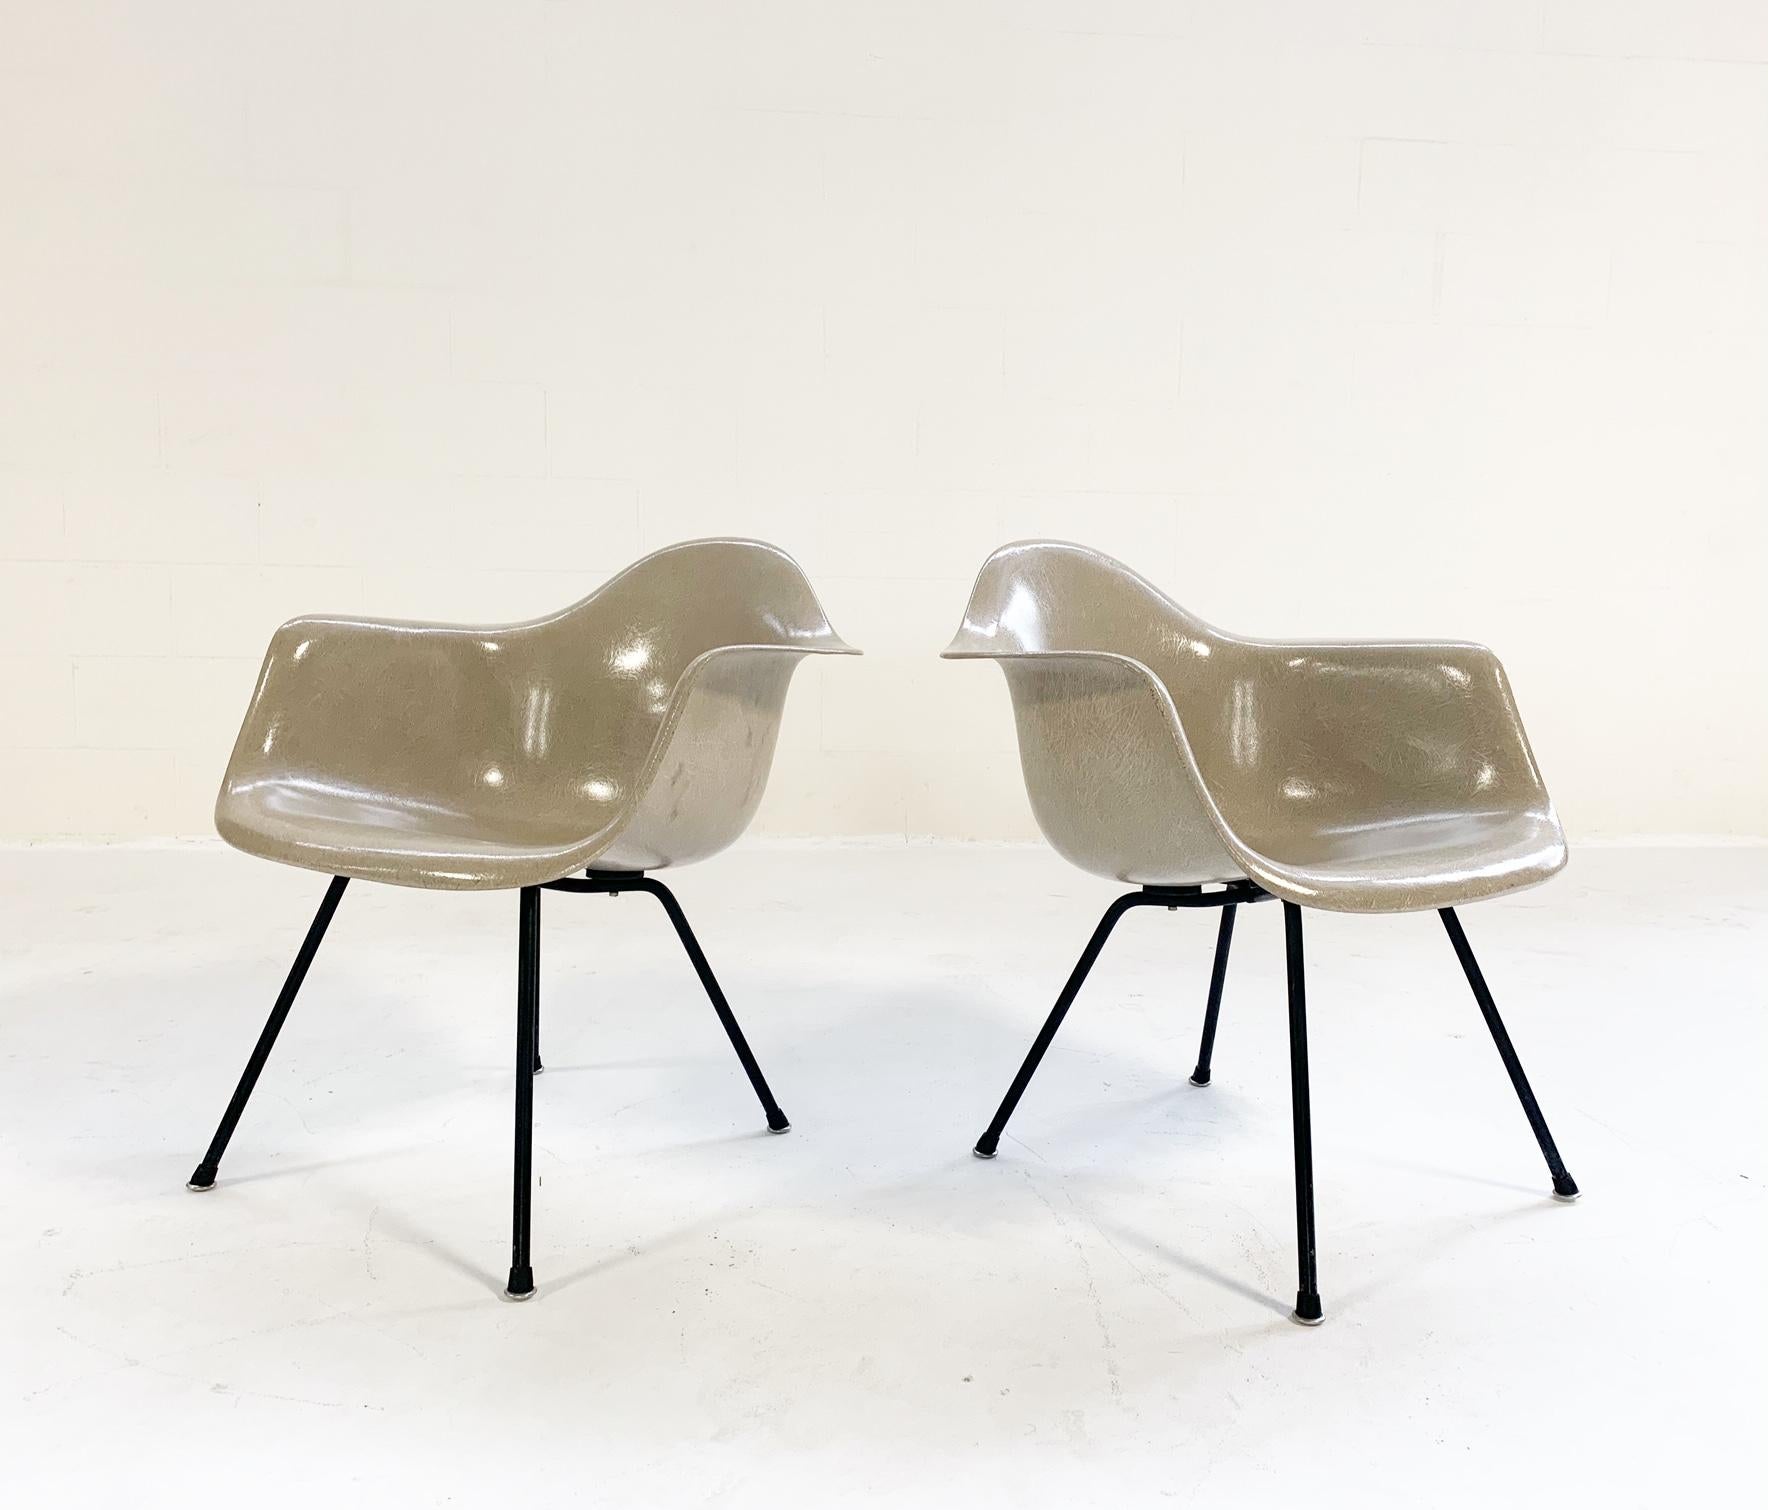 North American Charles and Ray Eames for Herman Miller DAX Chairs, Pair, circa 1950